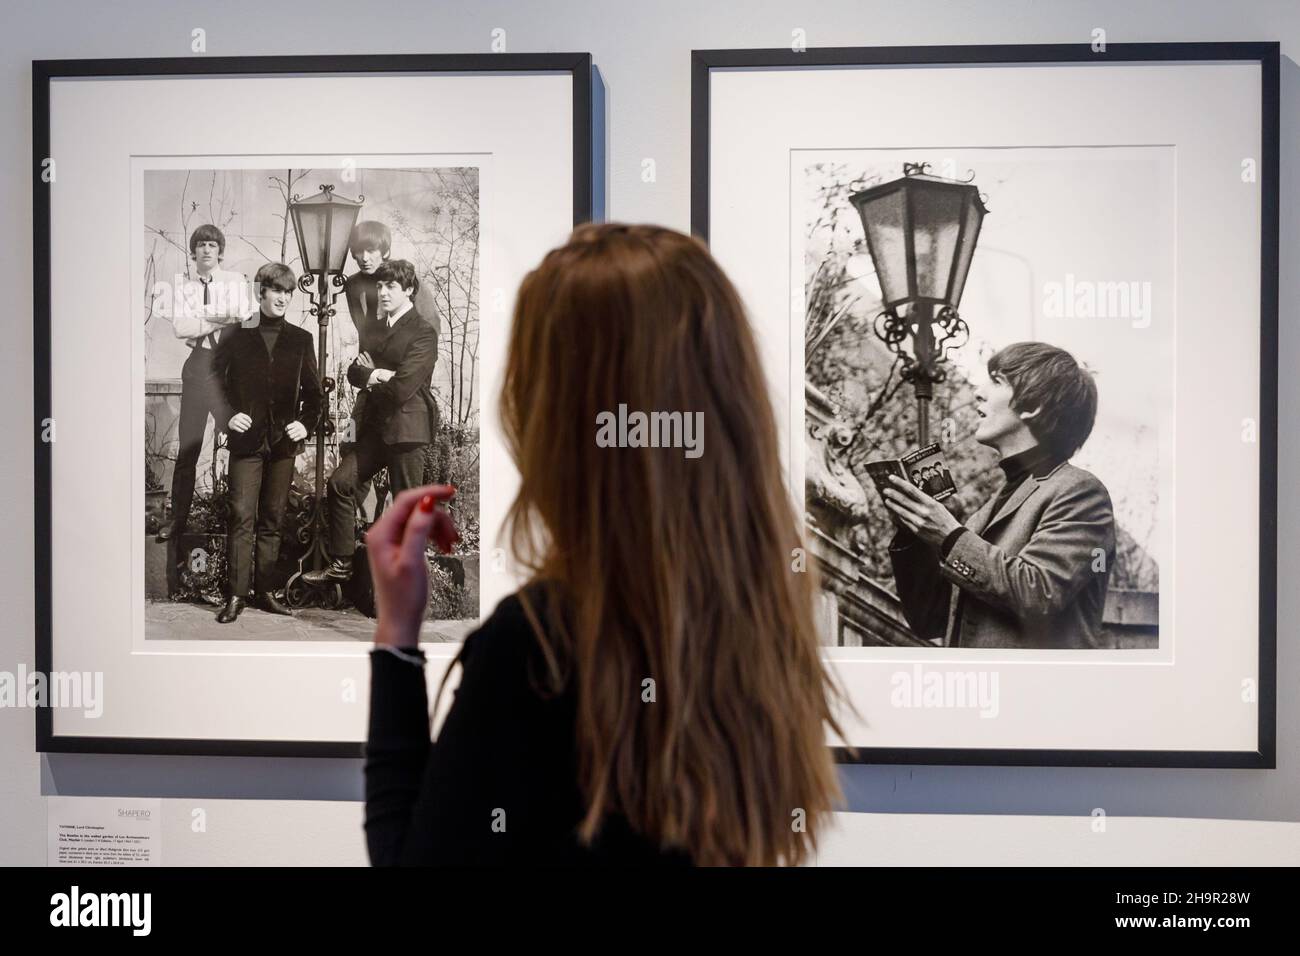 Lost photographs of The Beatles, Shapero Modern Gallery, London, UK. 8th December 2021. Candid photographs of The Beatles on the set of their first film A Hard Day’s Night, go on display for the first time at Shapero Modern Gallery, London. Lord Thynne, son of the 6th Marquess of Bath, captured these images in the spring of 1964. They were recently rediscovered in family papers after 57 years and developed from negatives. On display in a rare exhibition, 09/12/2021 - 16/01/2022.  Amanda Rose/Alamy Live News Stock Photo